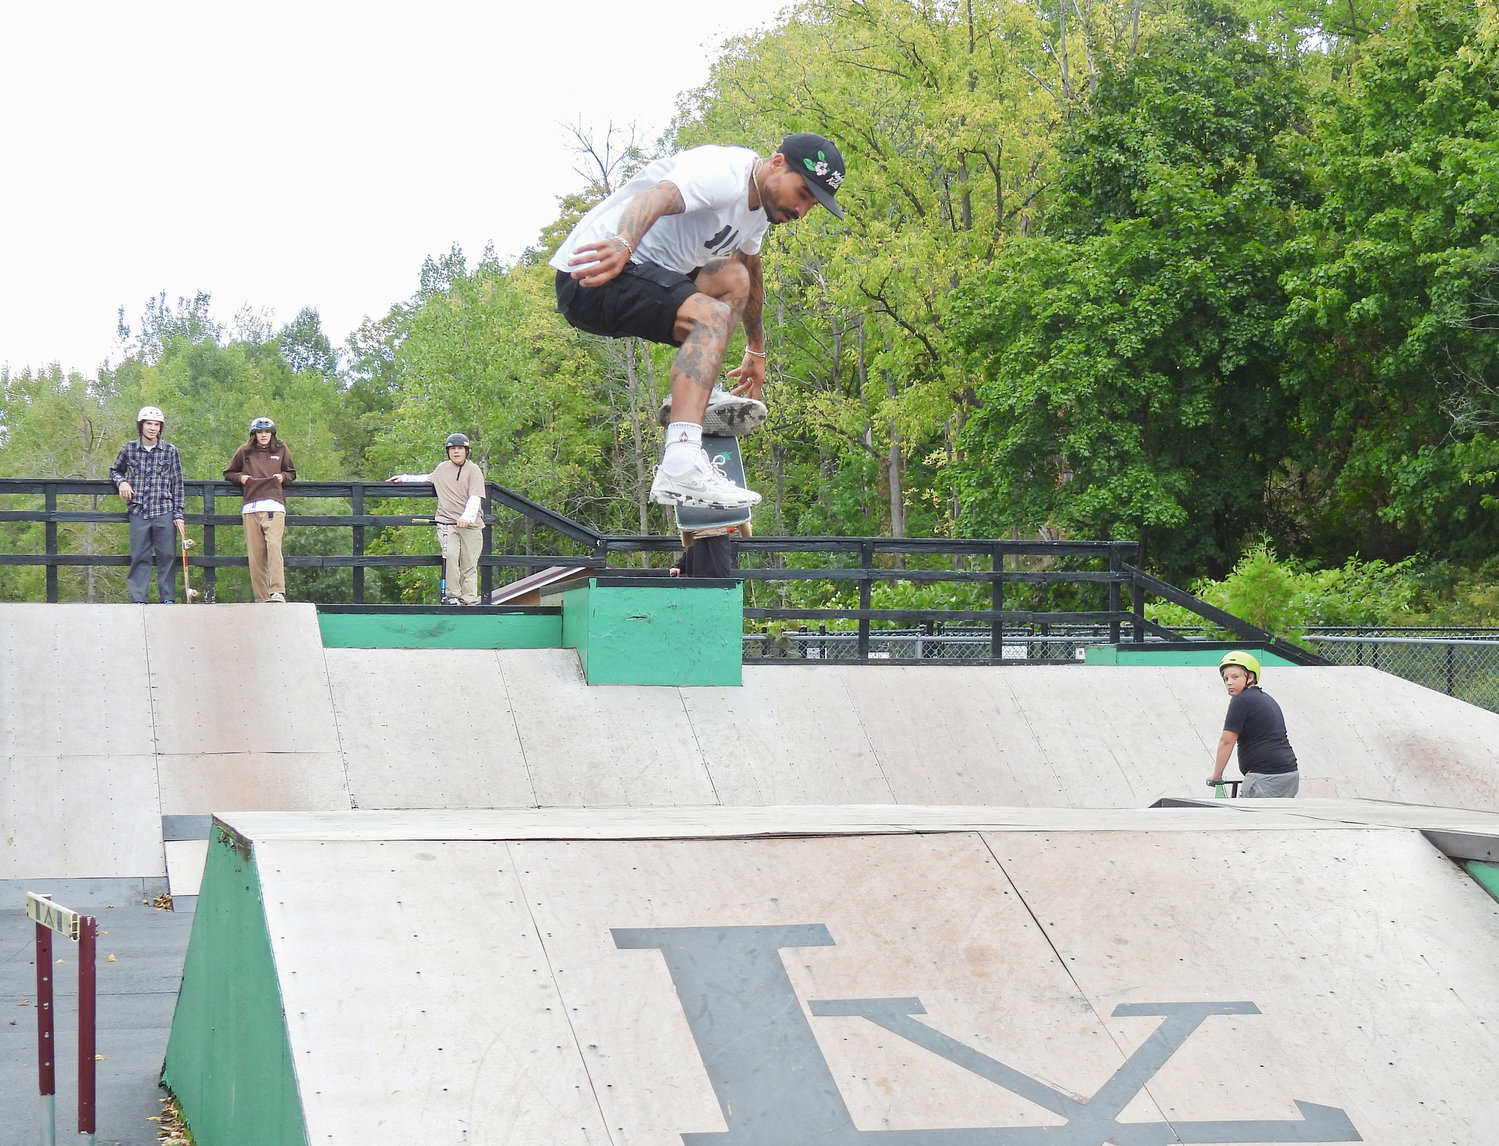 Emanuel "Manny" Santiago launches over a ramp at Lenox Skate Park on Saturday, Sept. 24